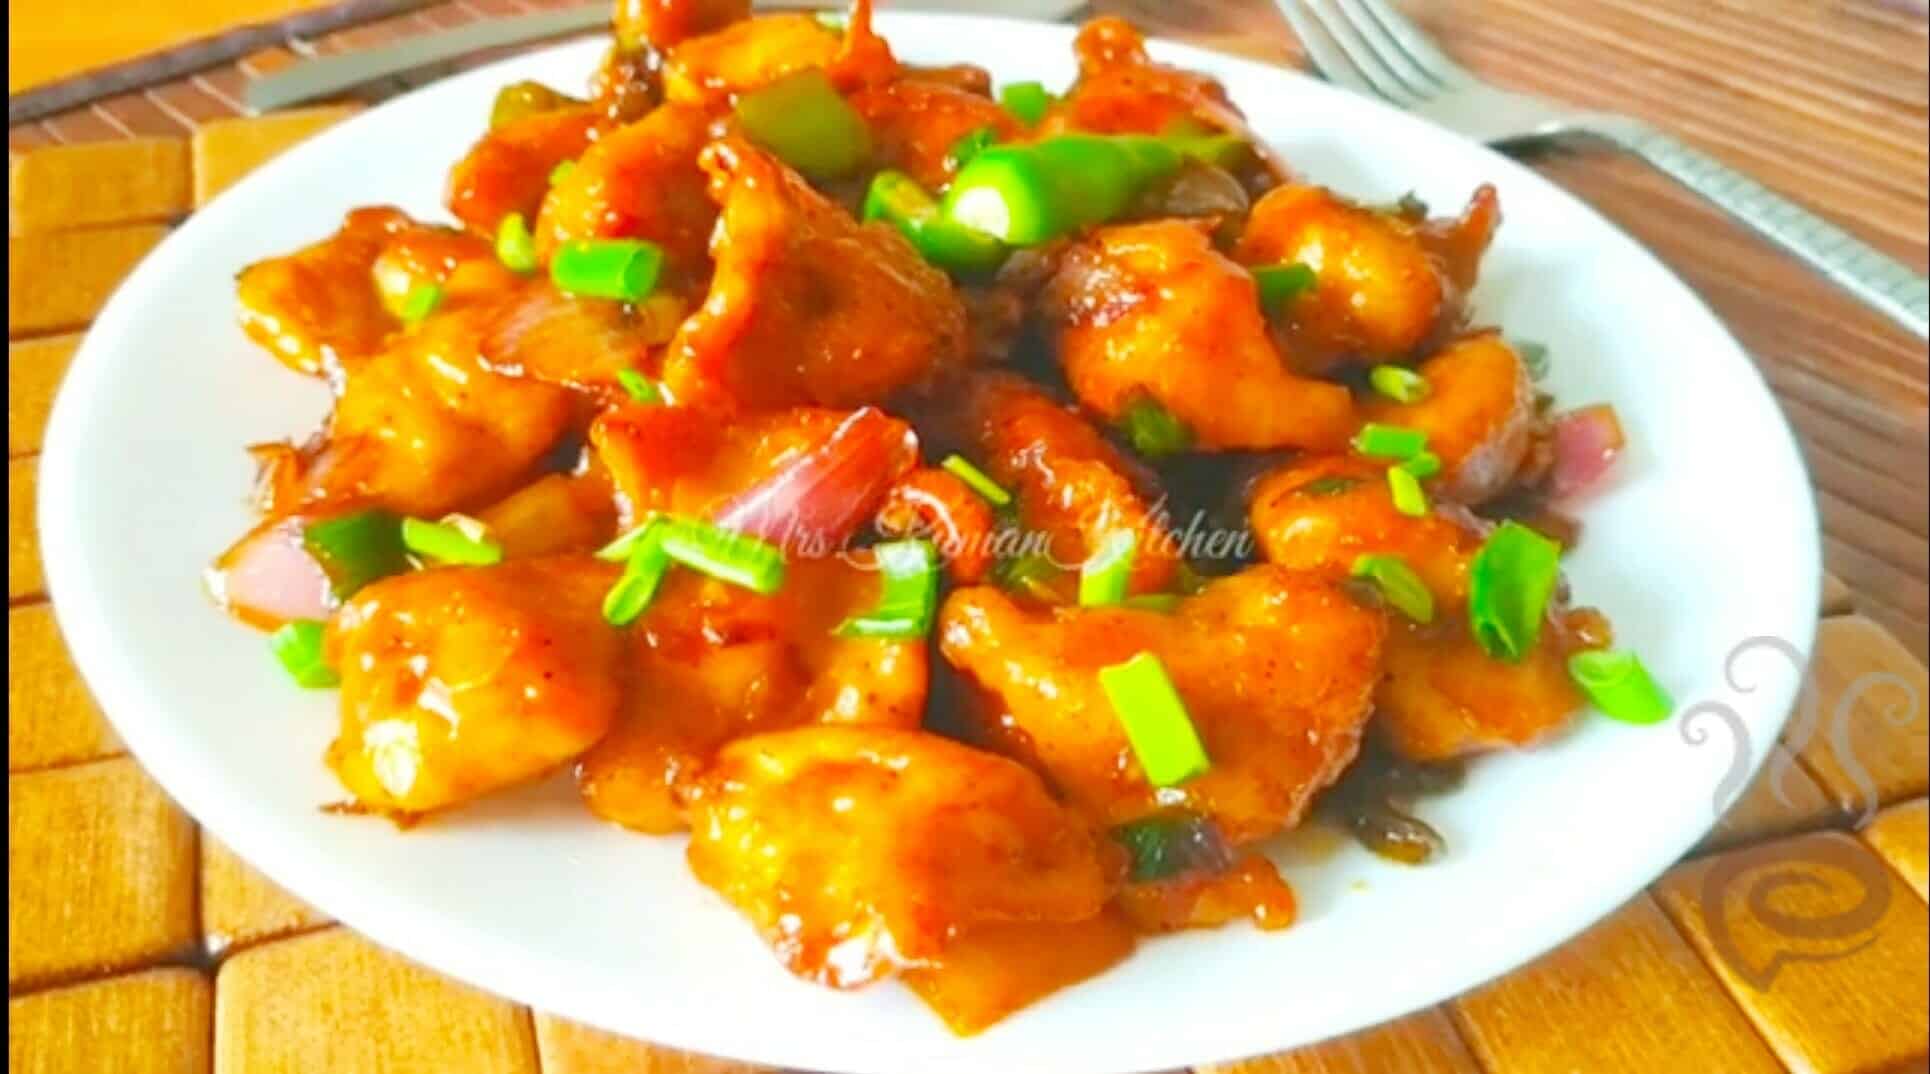 Chinese Restaurant Style Chilli Chicken With Video